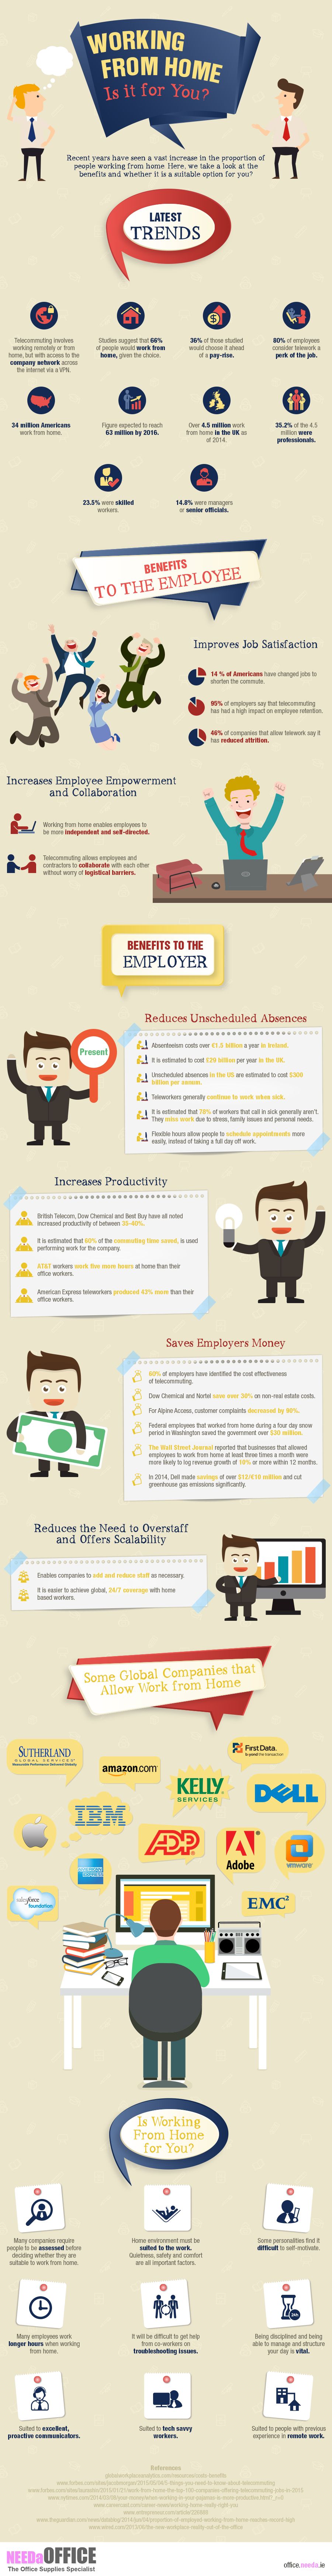 Working From Home: Is It For You? [INFOGRAPHIC]